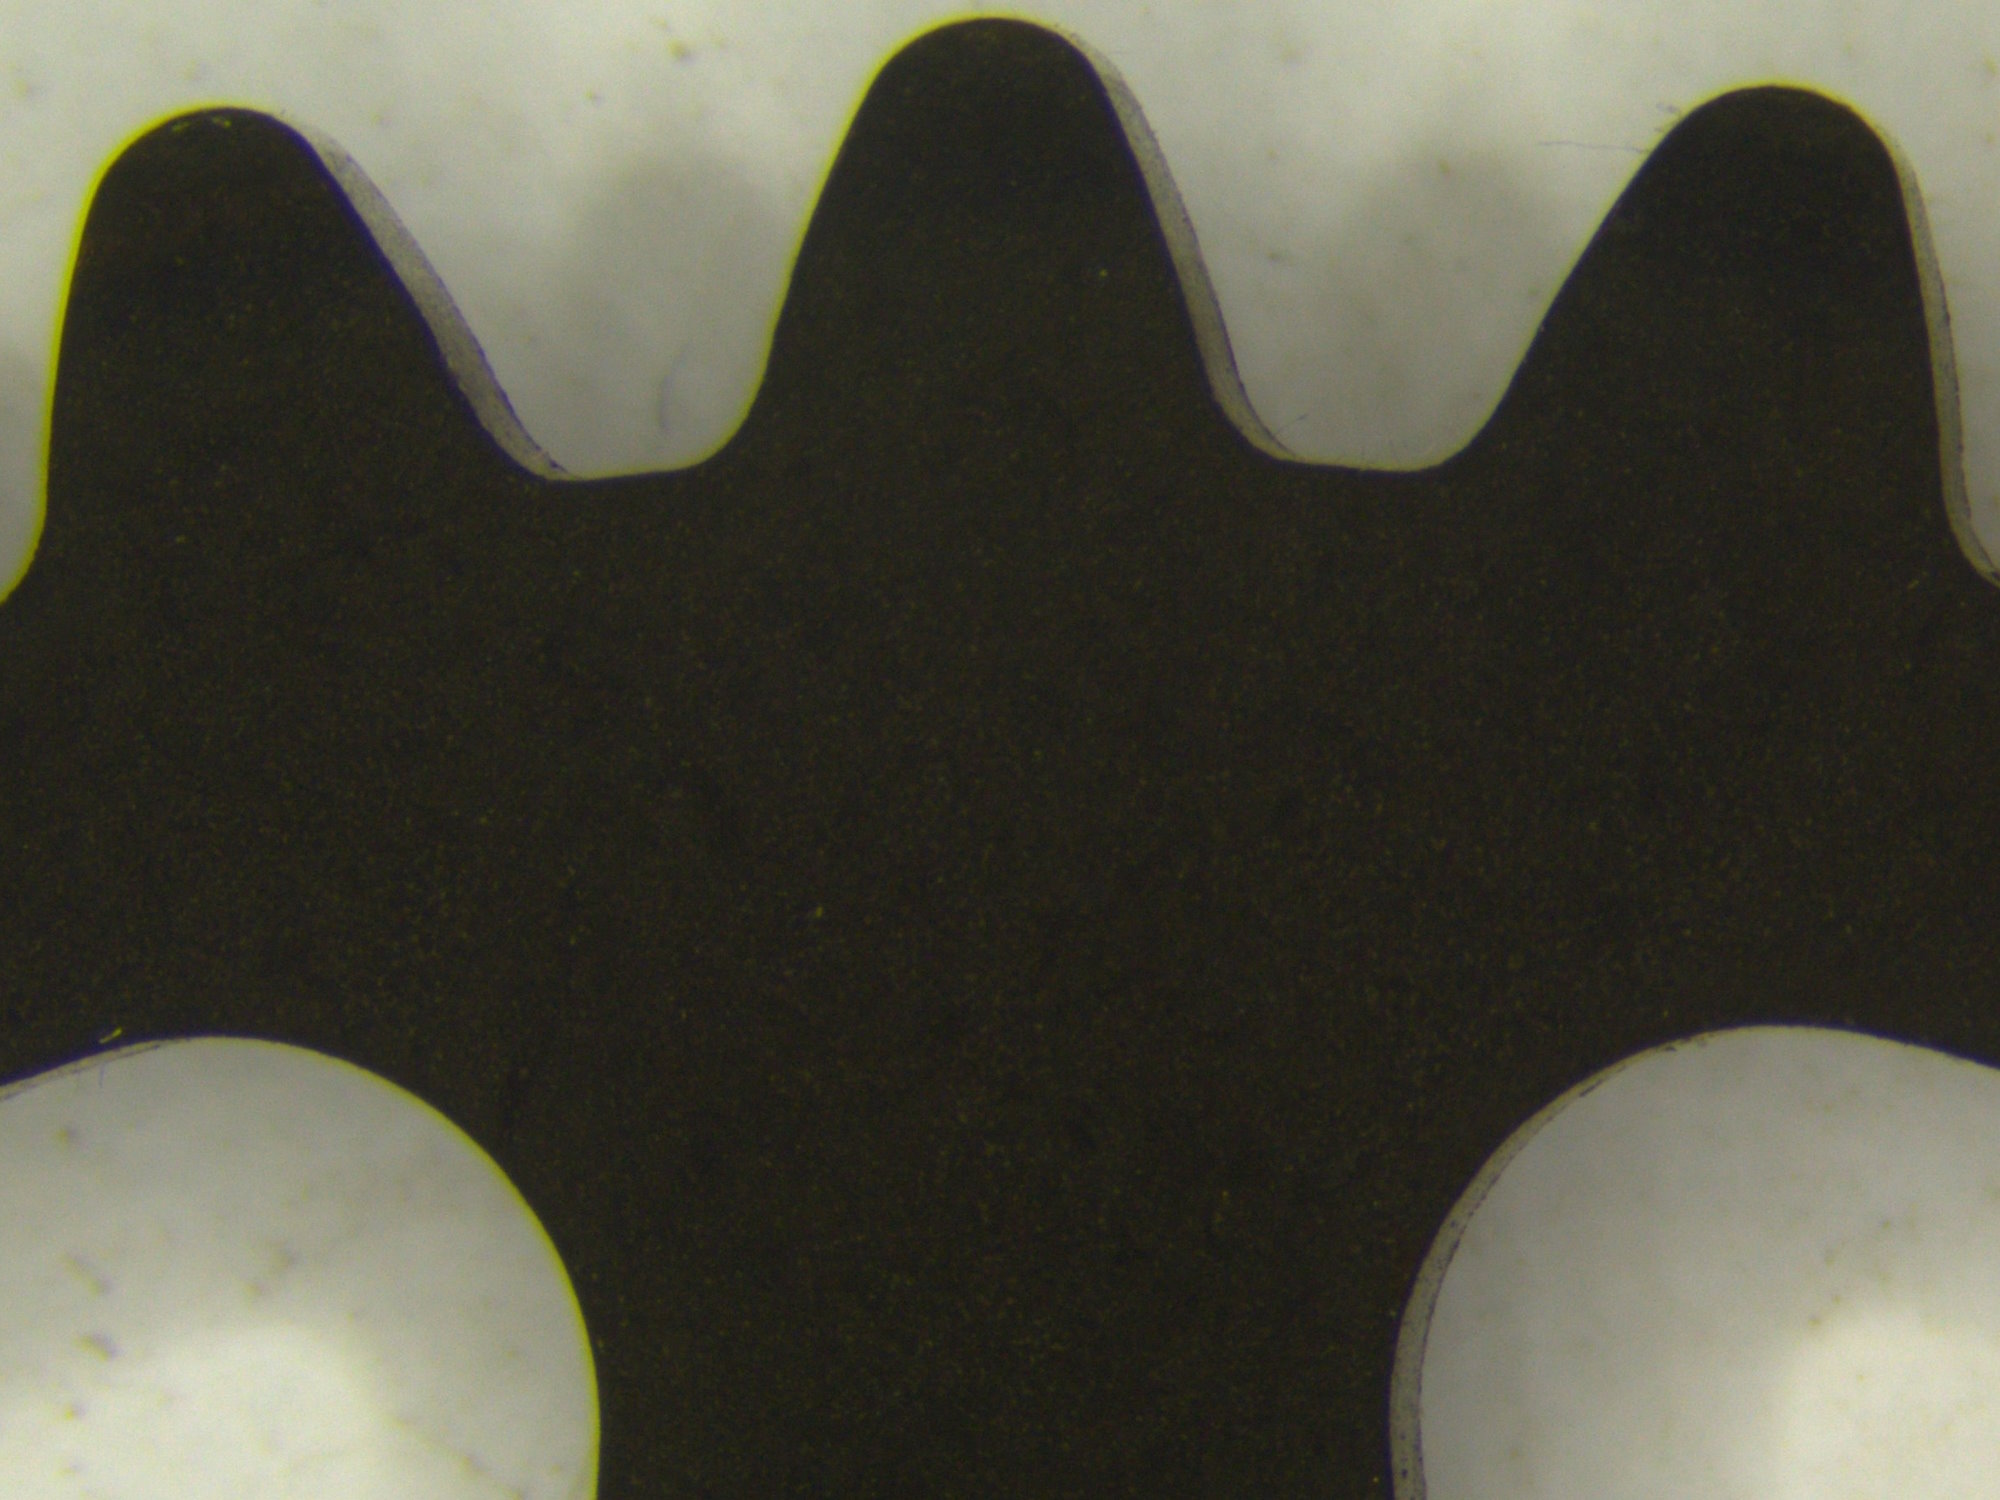 [Translate to chinese:] Sprocket - RL with crossed polarizers: Reflective areas